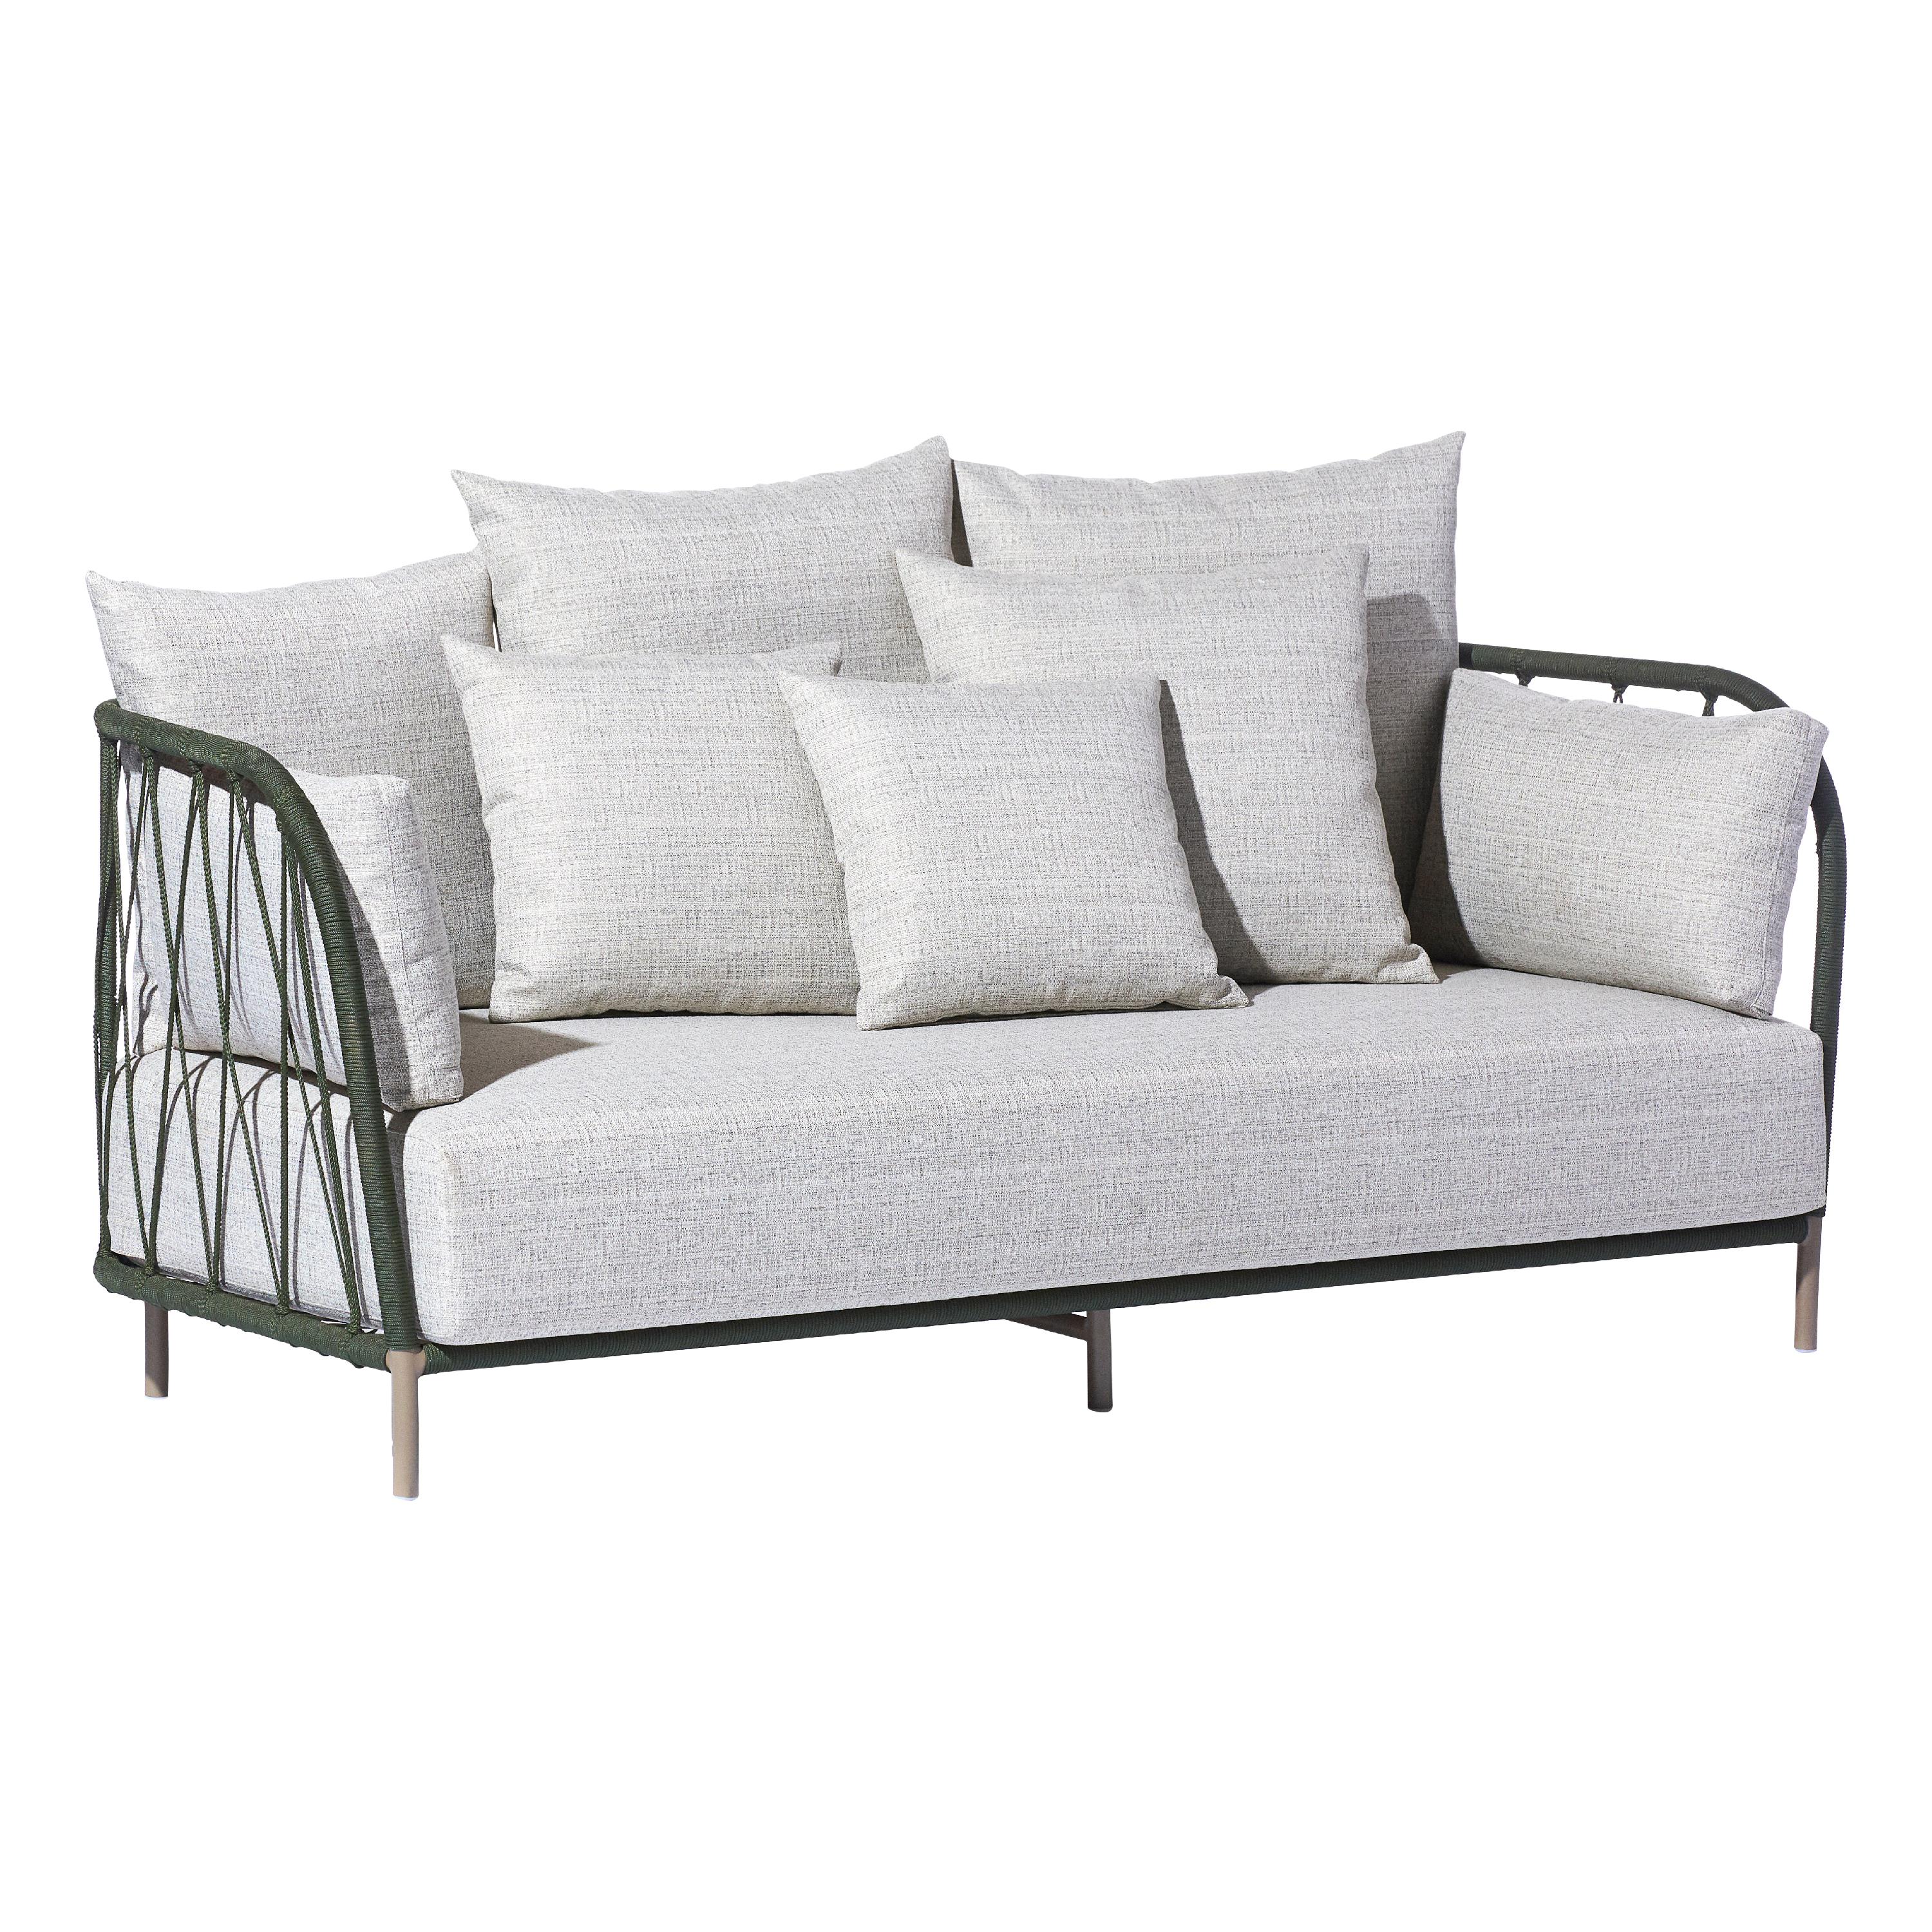 Contemporary Outdoor Sofa, Aluminum with Nautical Rope Pattern, Bask